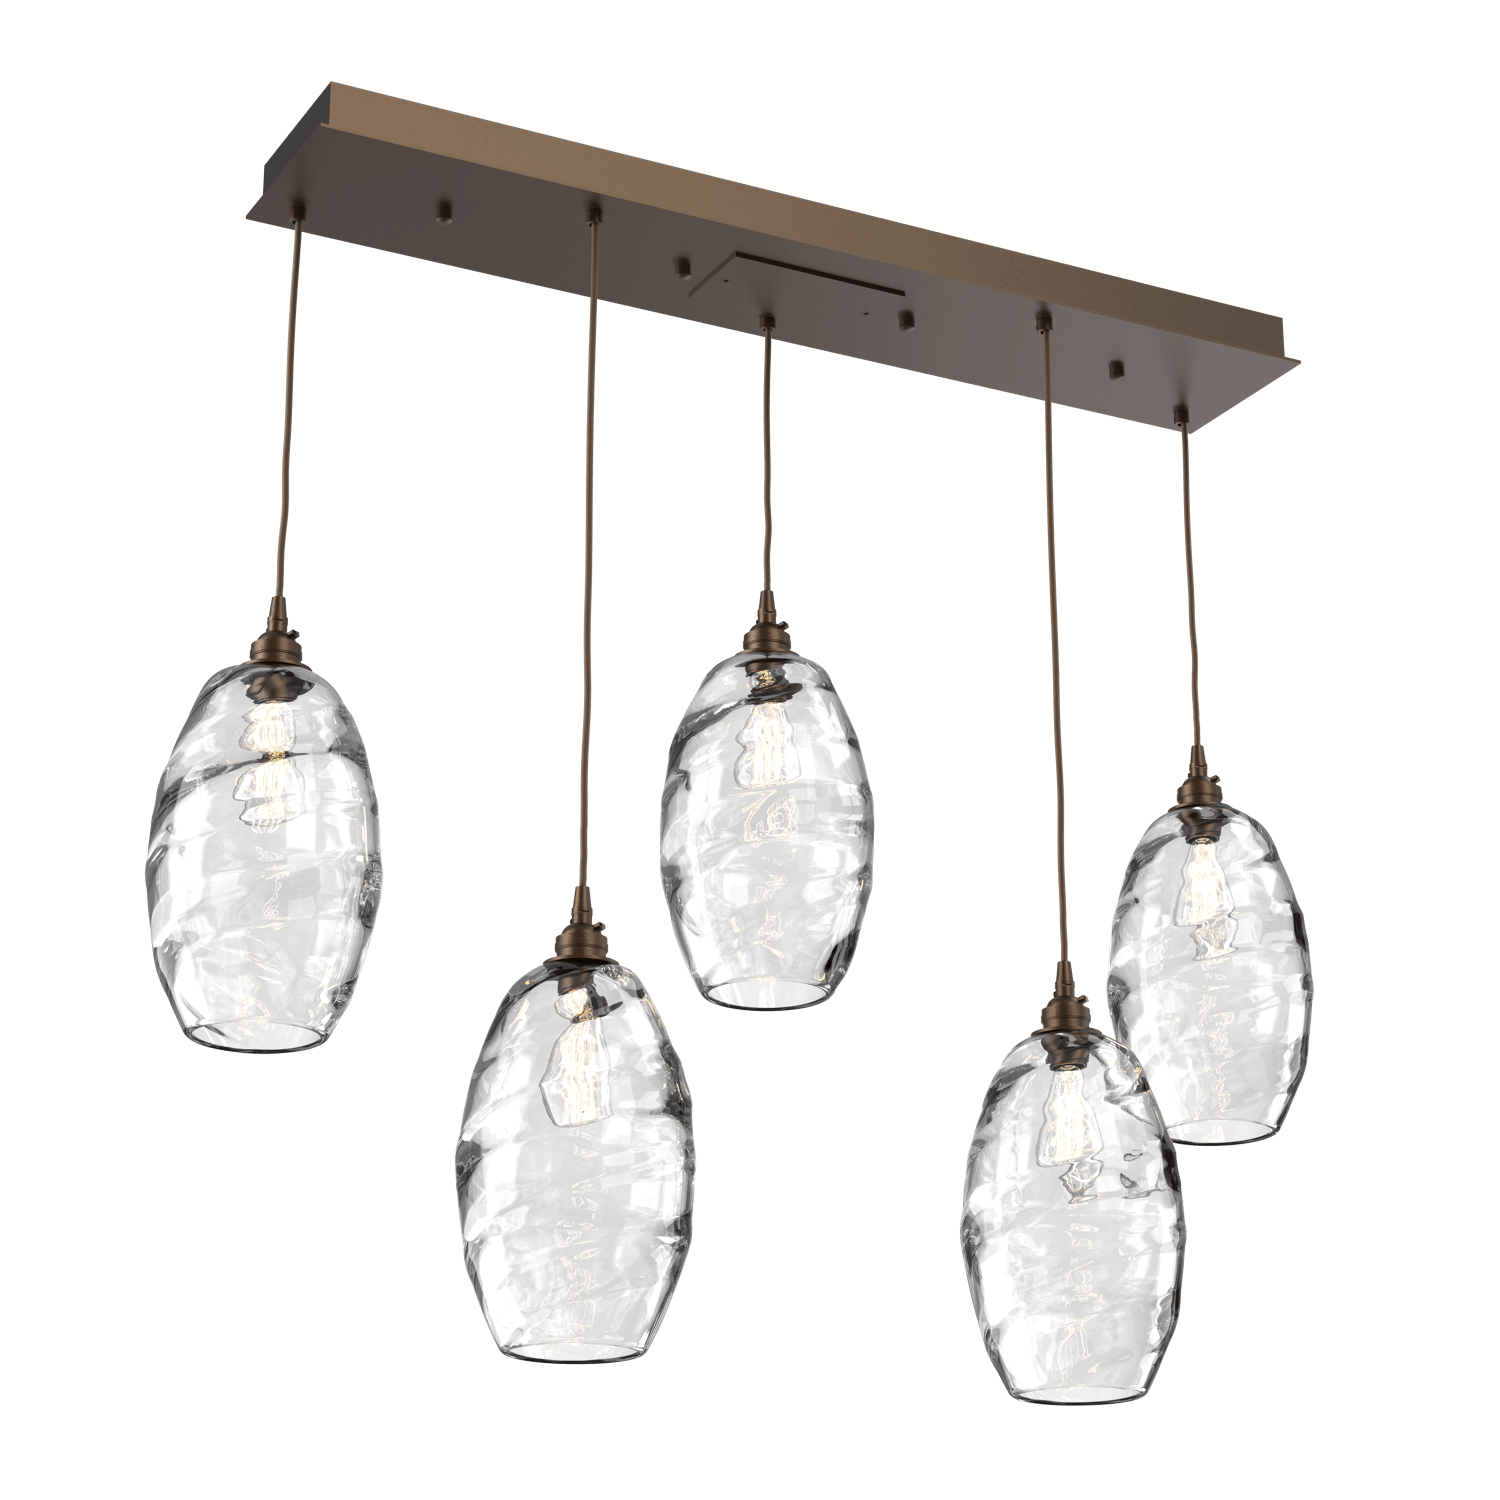 PLB0035-05-FB-OC-Hammerton-Studio-Optic-Blown-Glass-Elisse-5-light-linear-pendant-chandelier-with-flat-bronze-finish-and-optic-clear-blown-glass-shades-and-incandescent-lamping